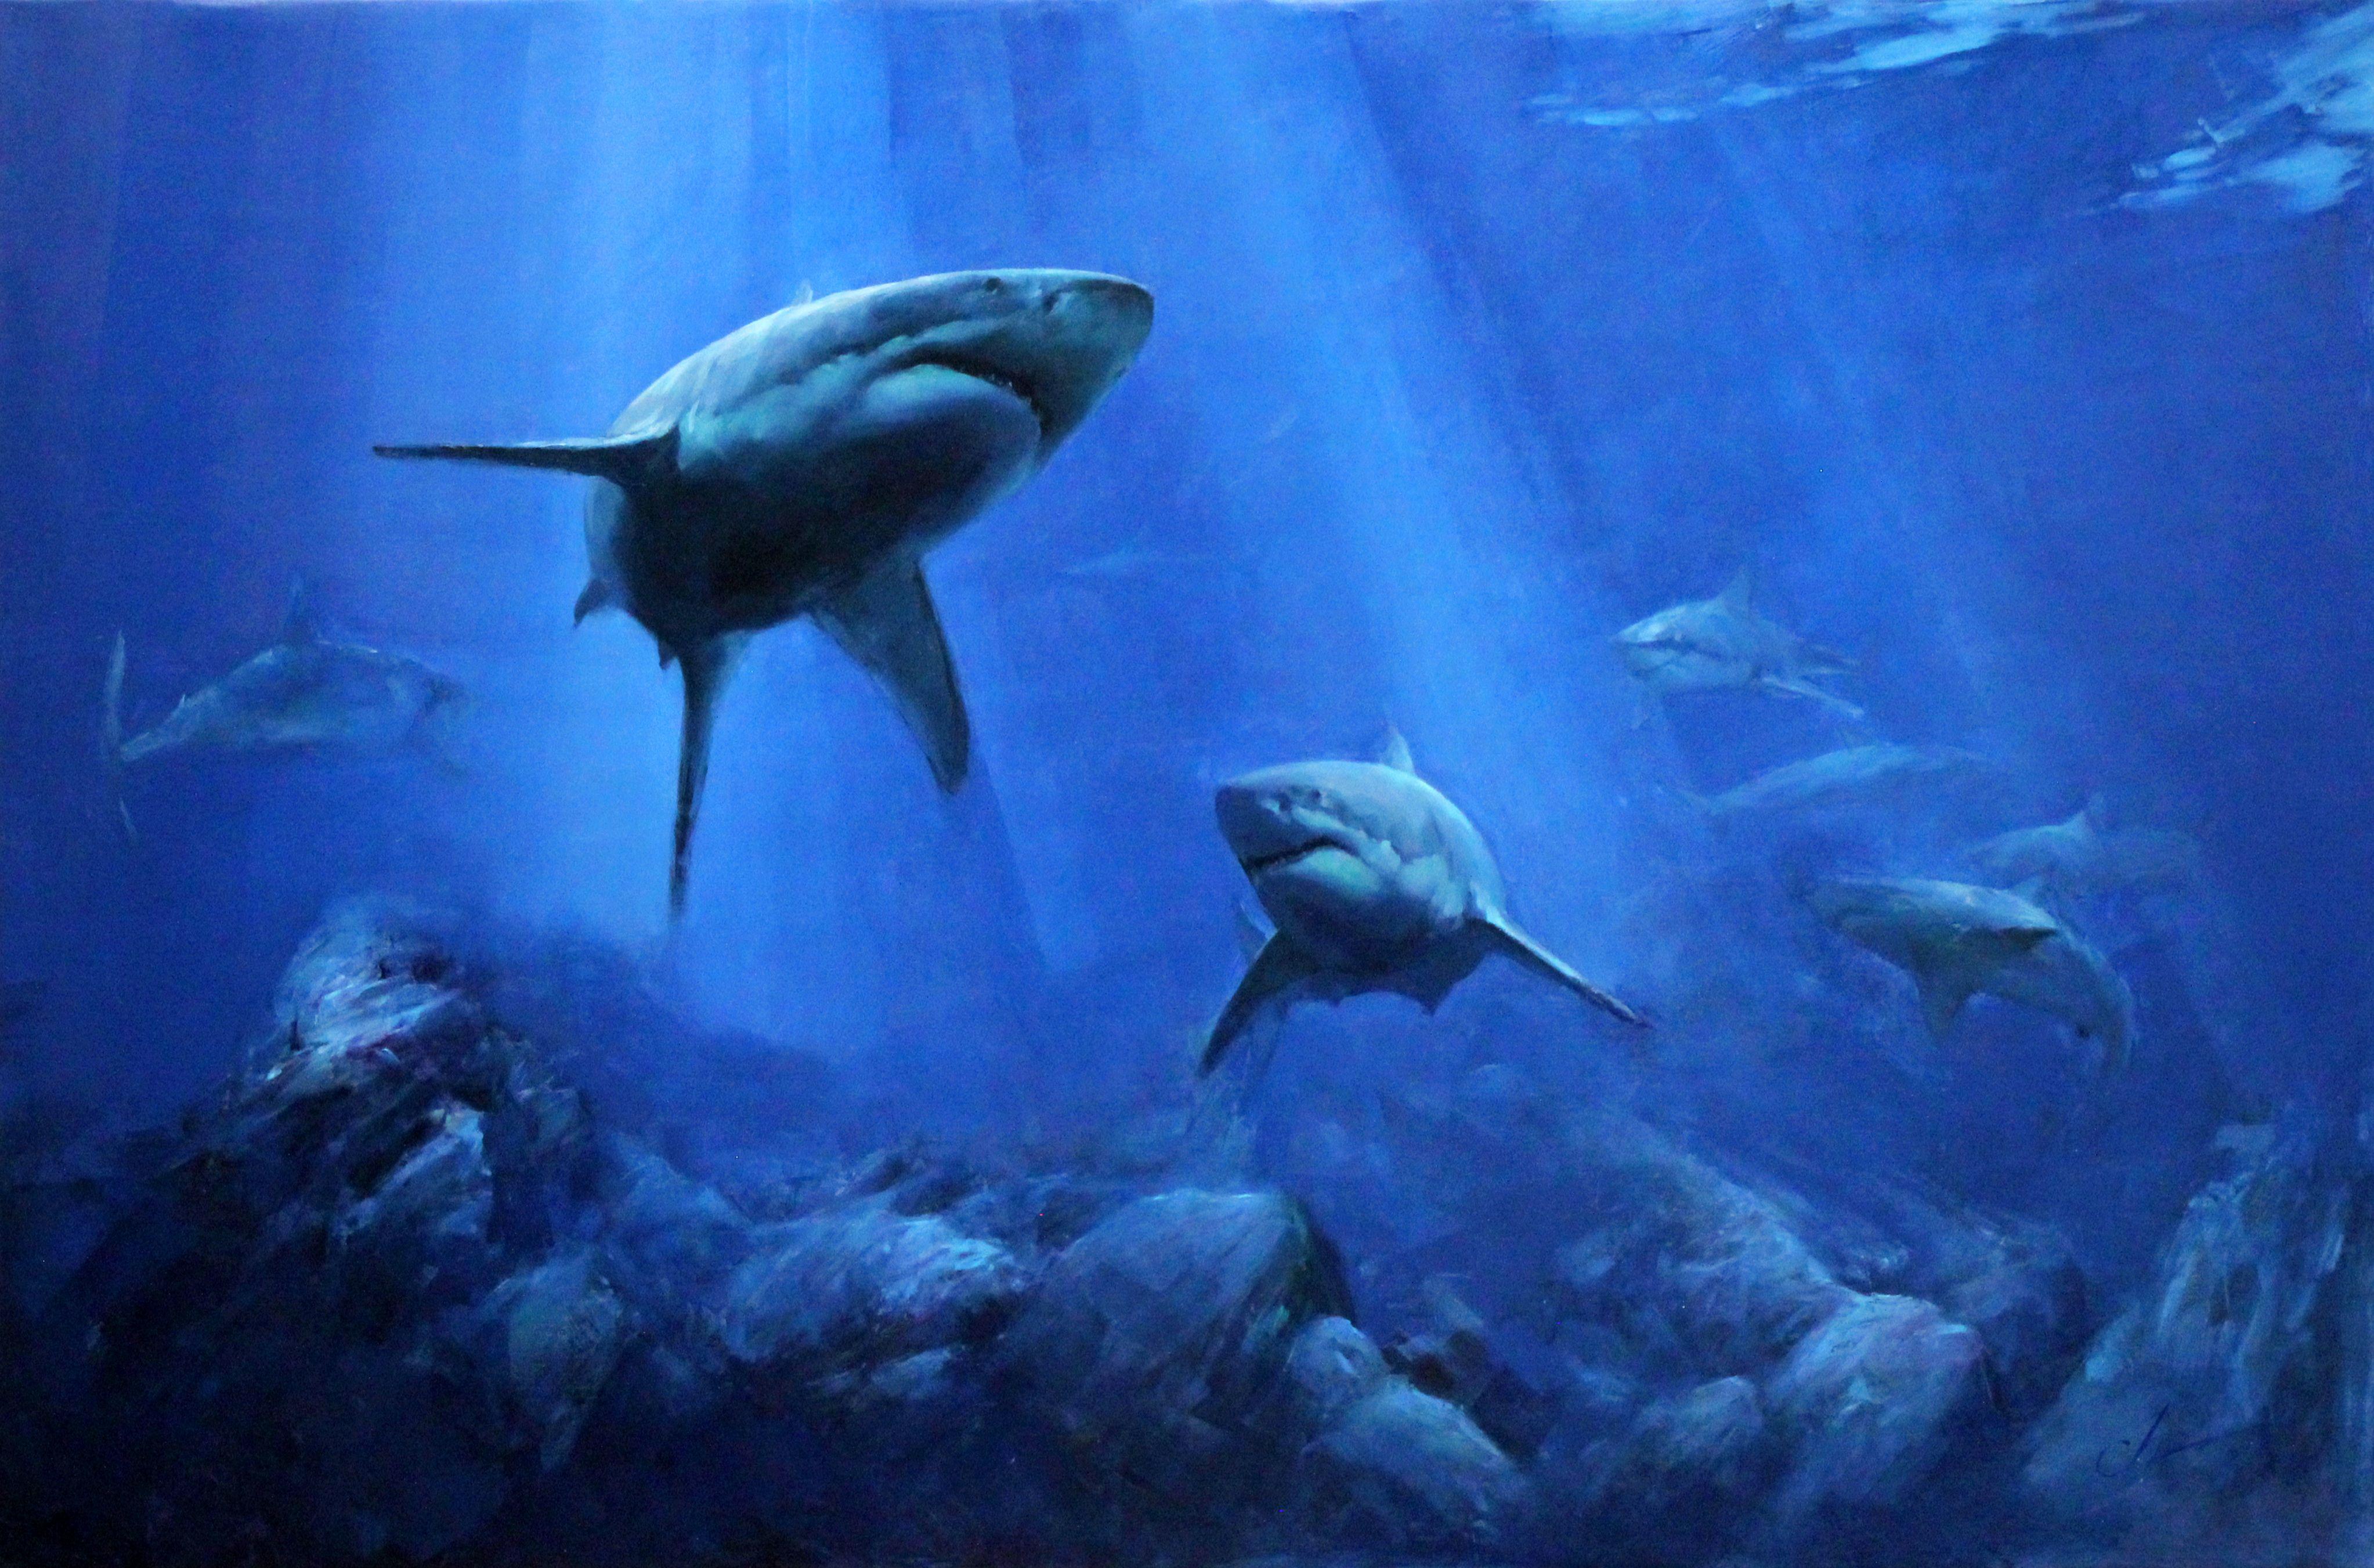 Dive into the enchanting Undersea World with this mesmerizing Fish Painting, featuring a magnificent shark as the focal point. This oil painting original captures the breathtaking beauty of marine animals and the underwater world, showcasing the